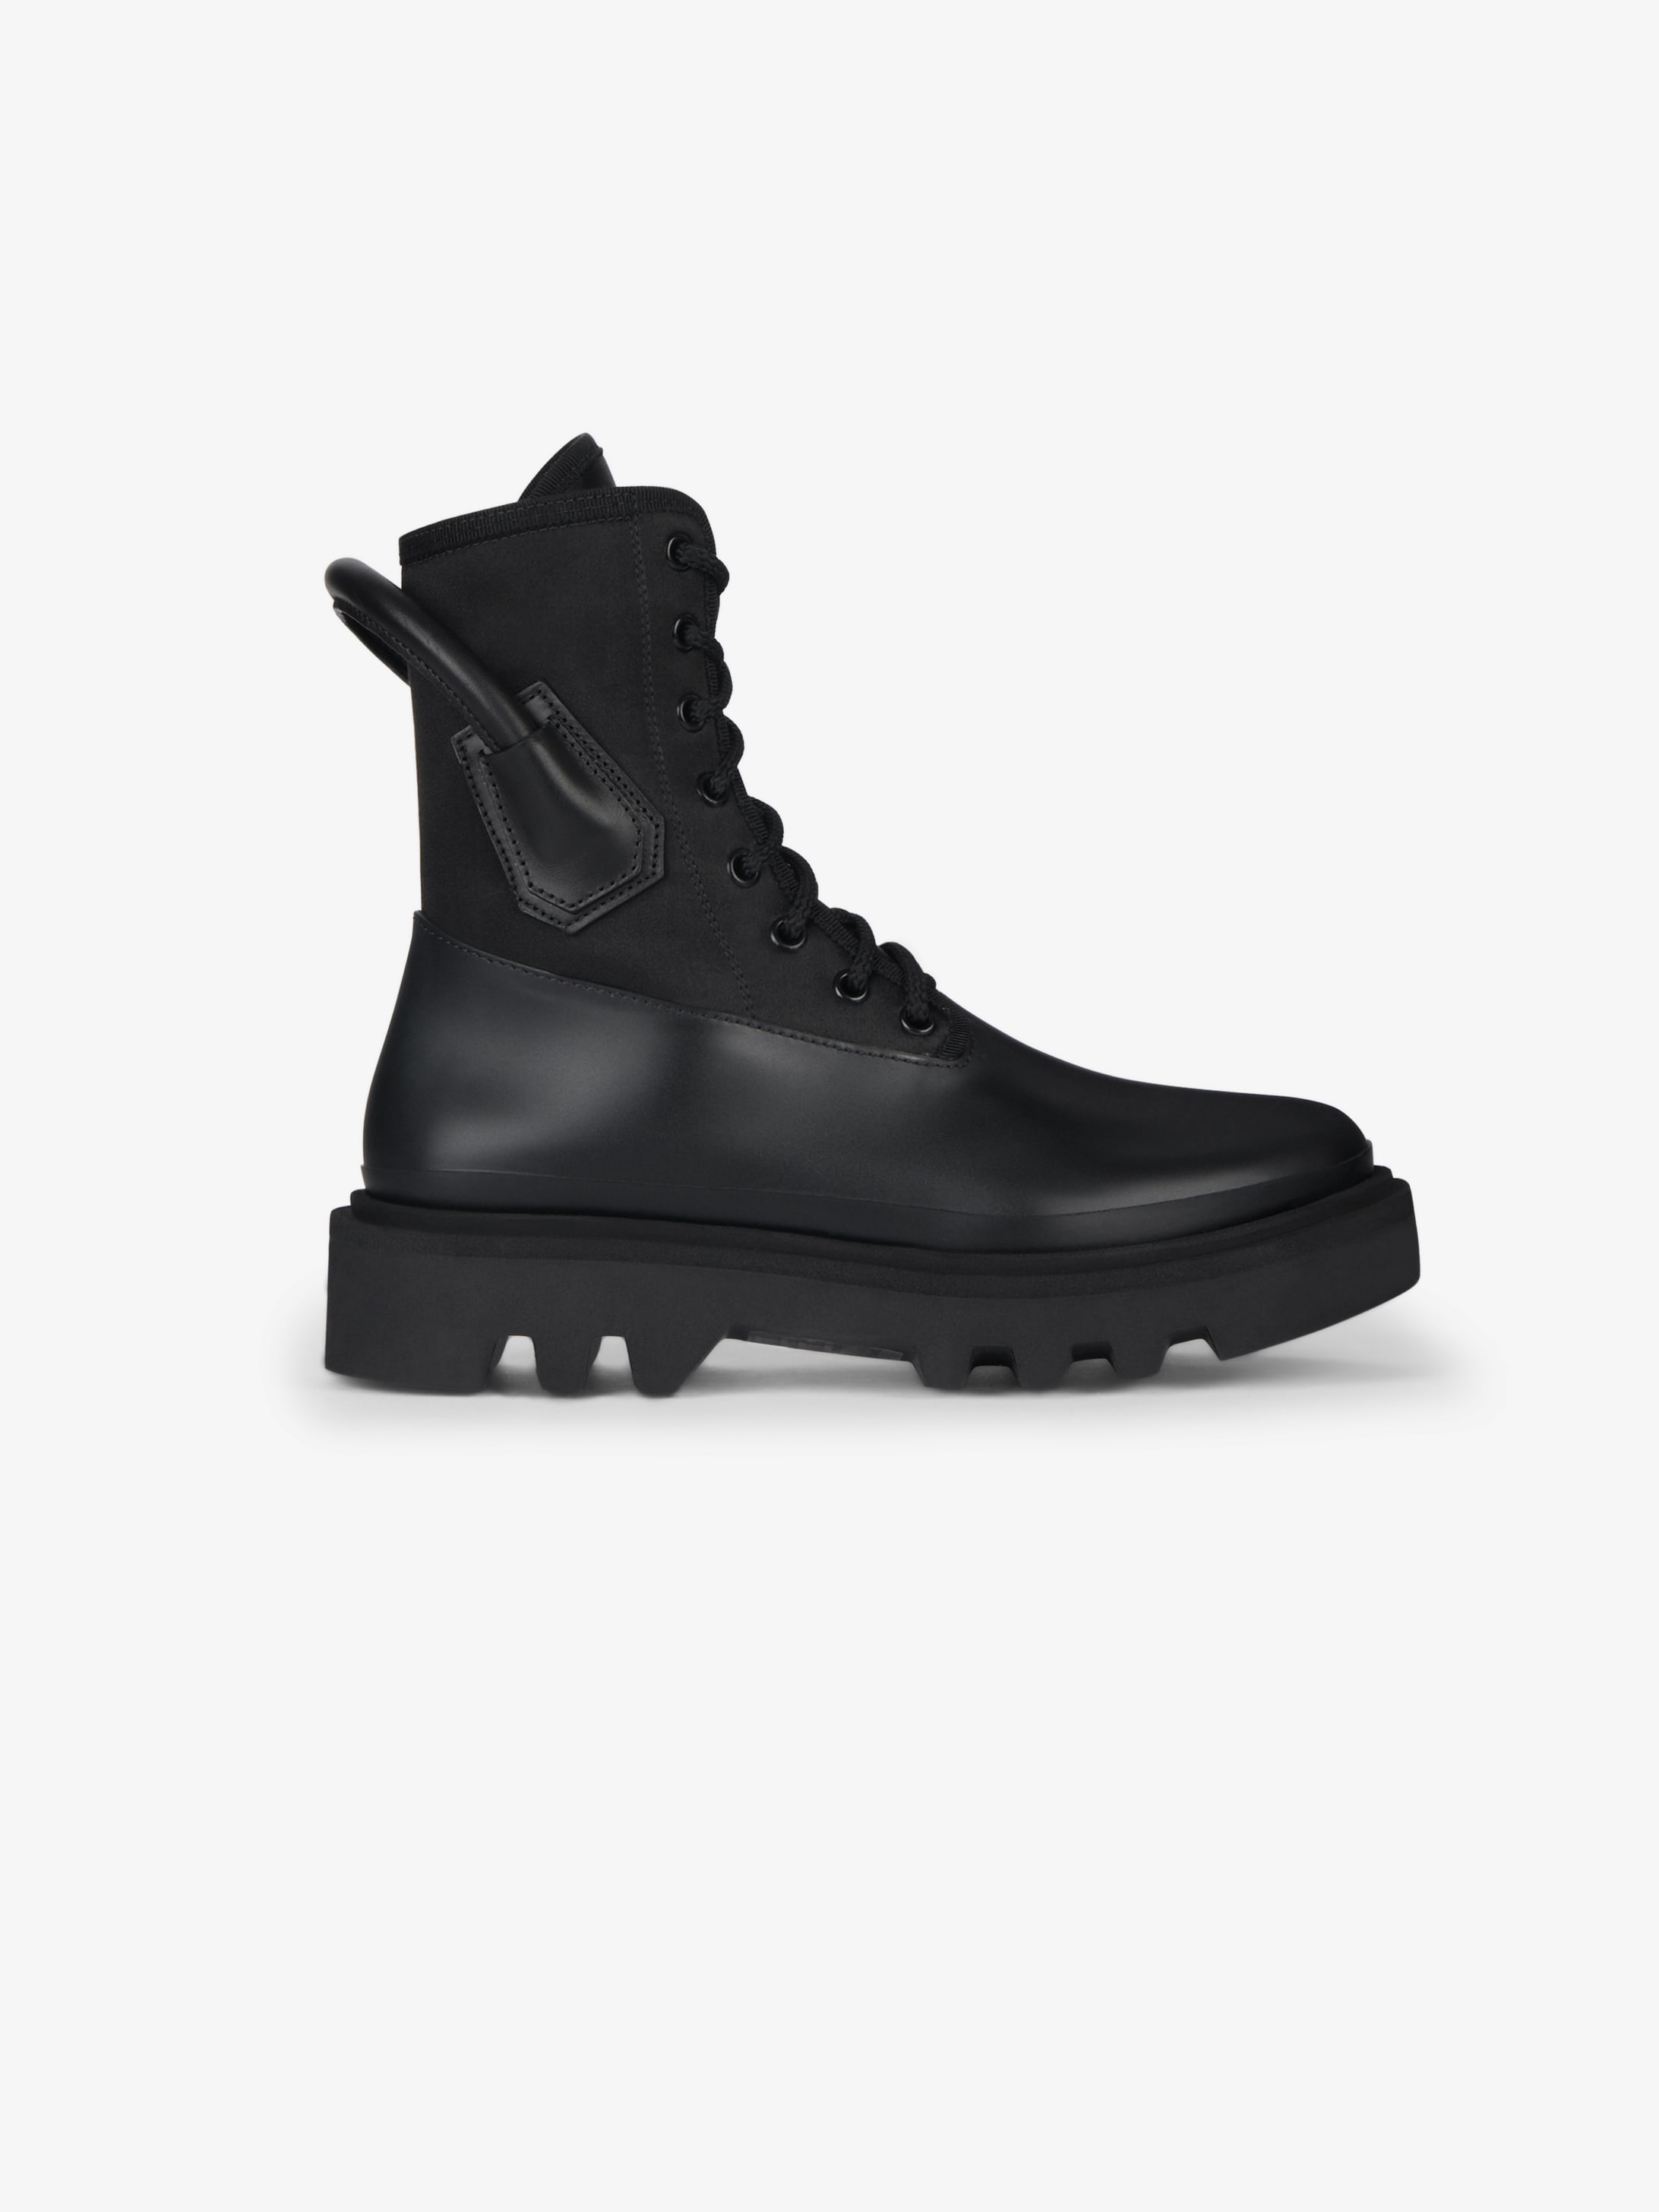 Combat boots in rubber neoprene and 